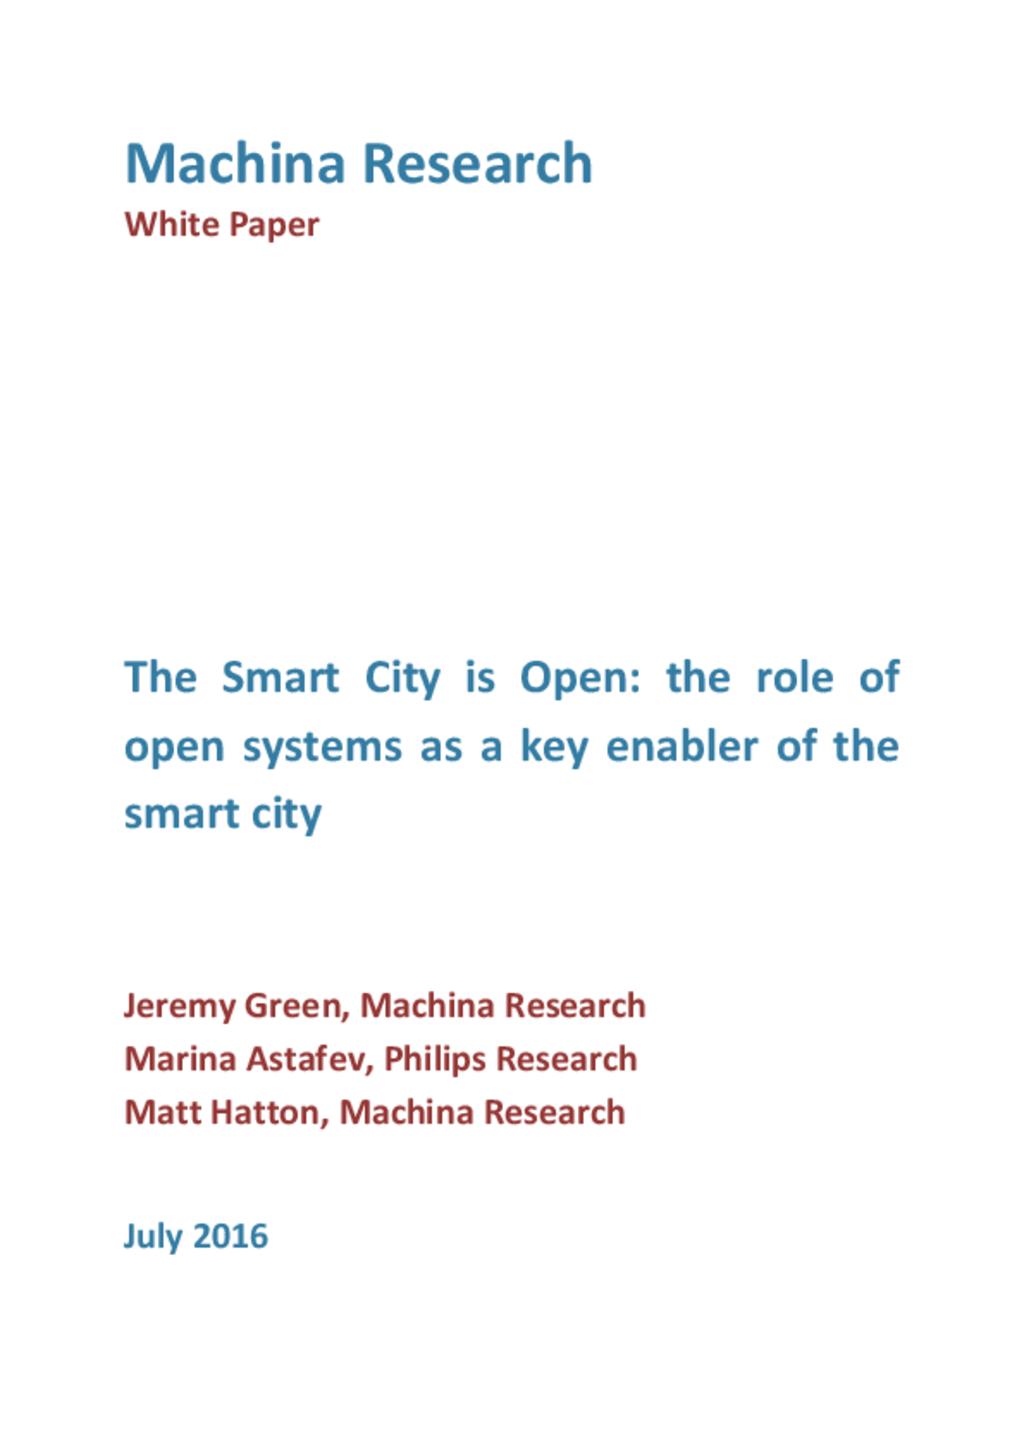 The Smart City is Open